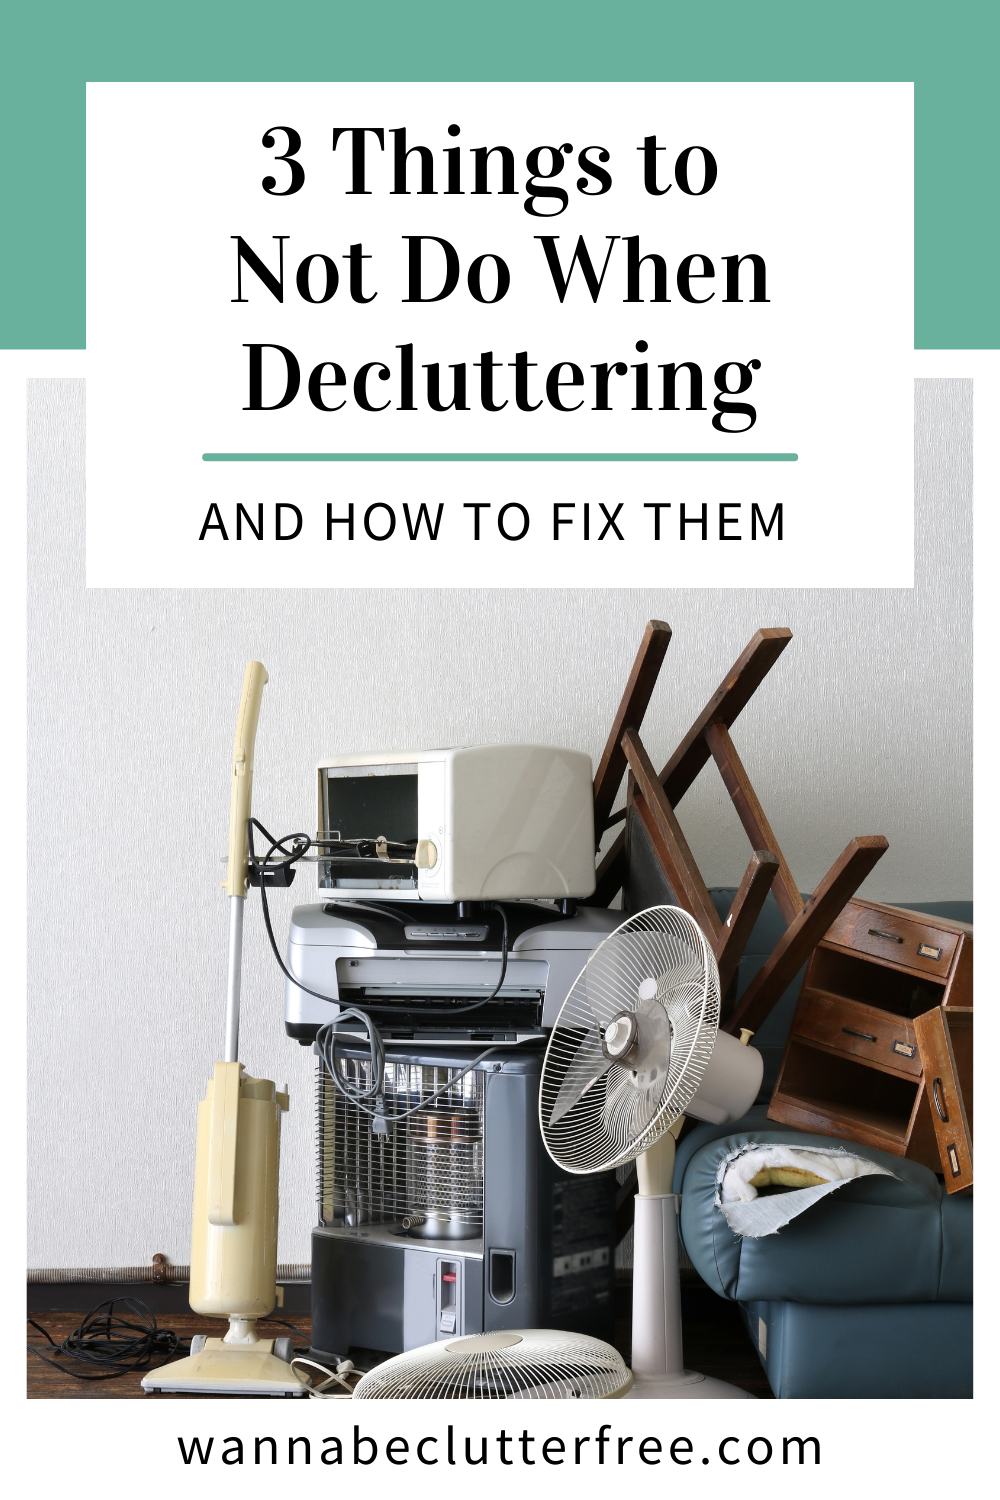 3 Things to Not Do When Decluttering